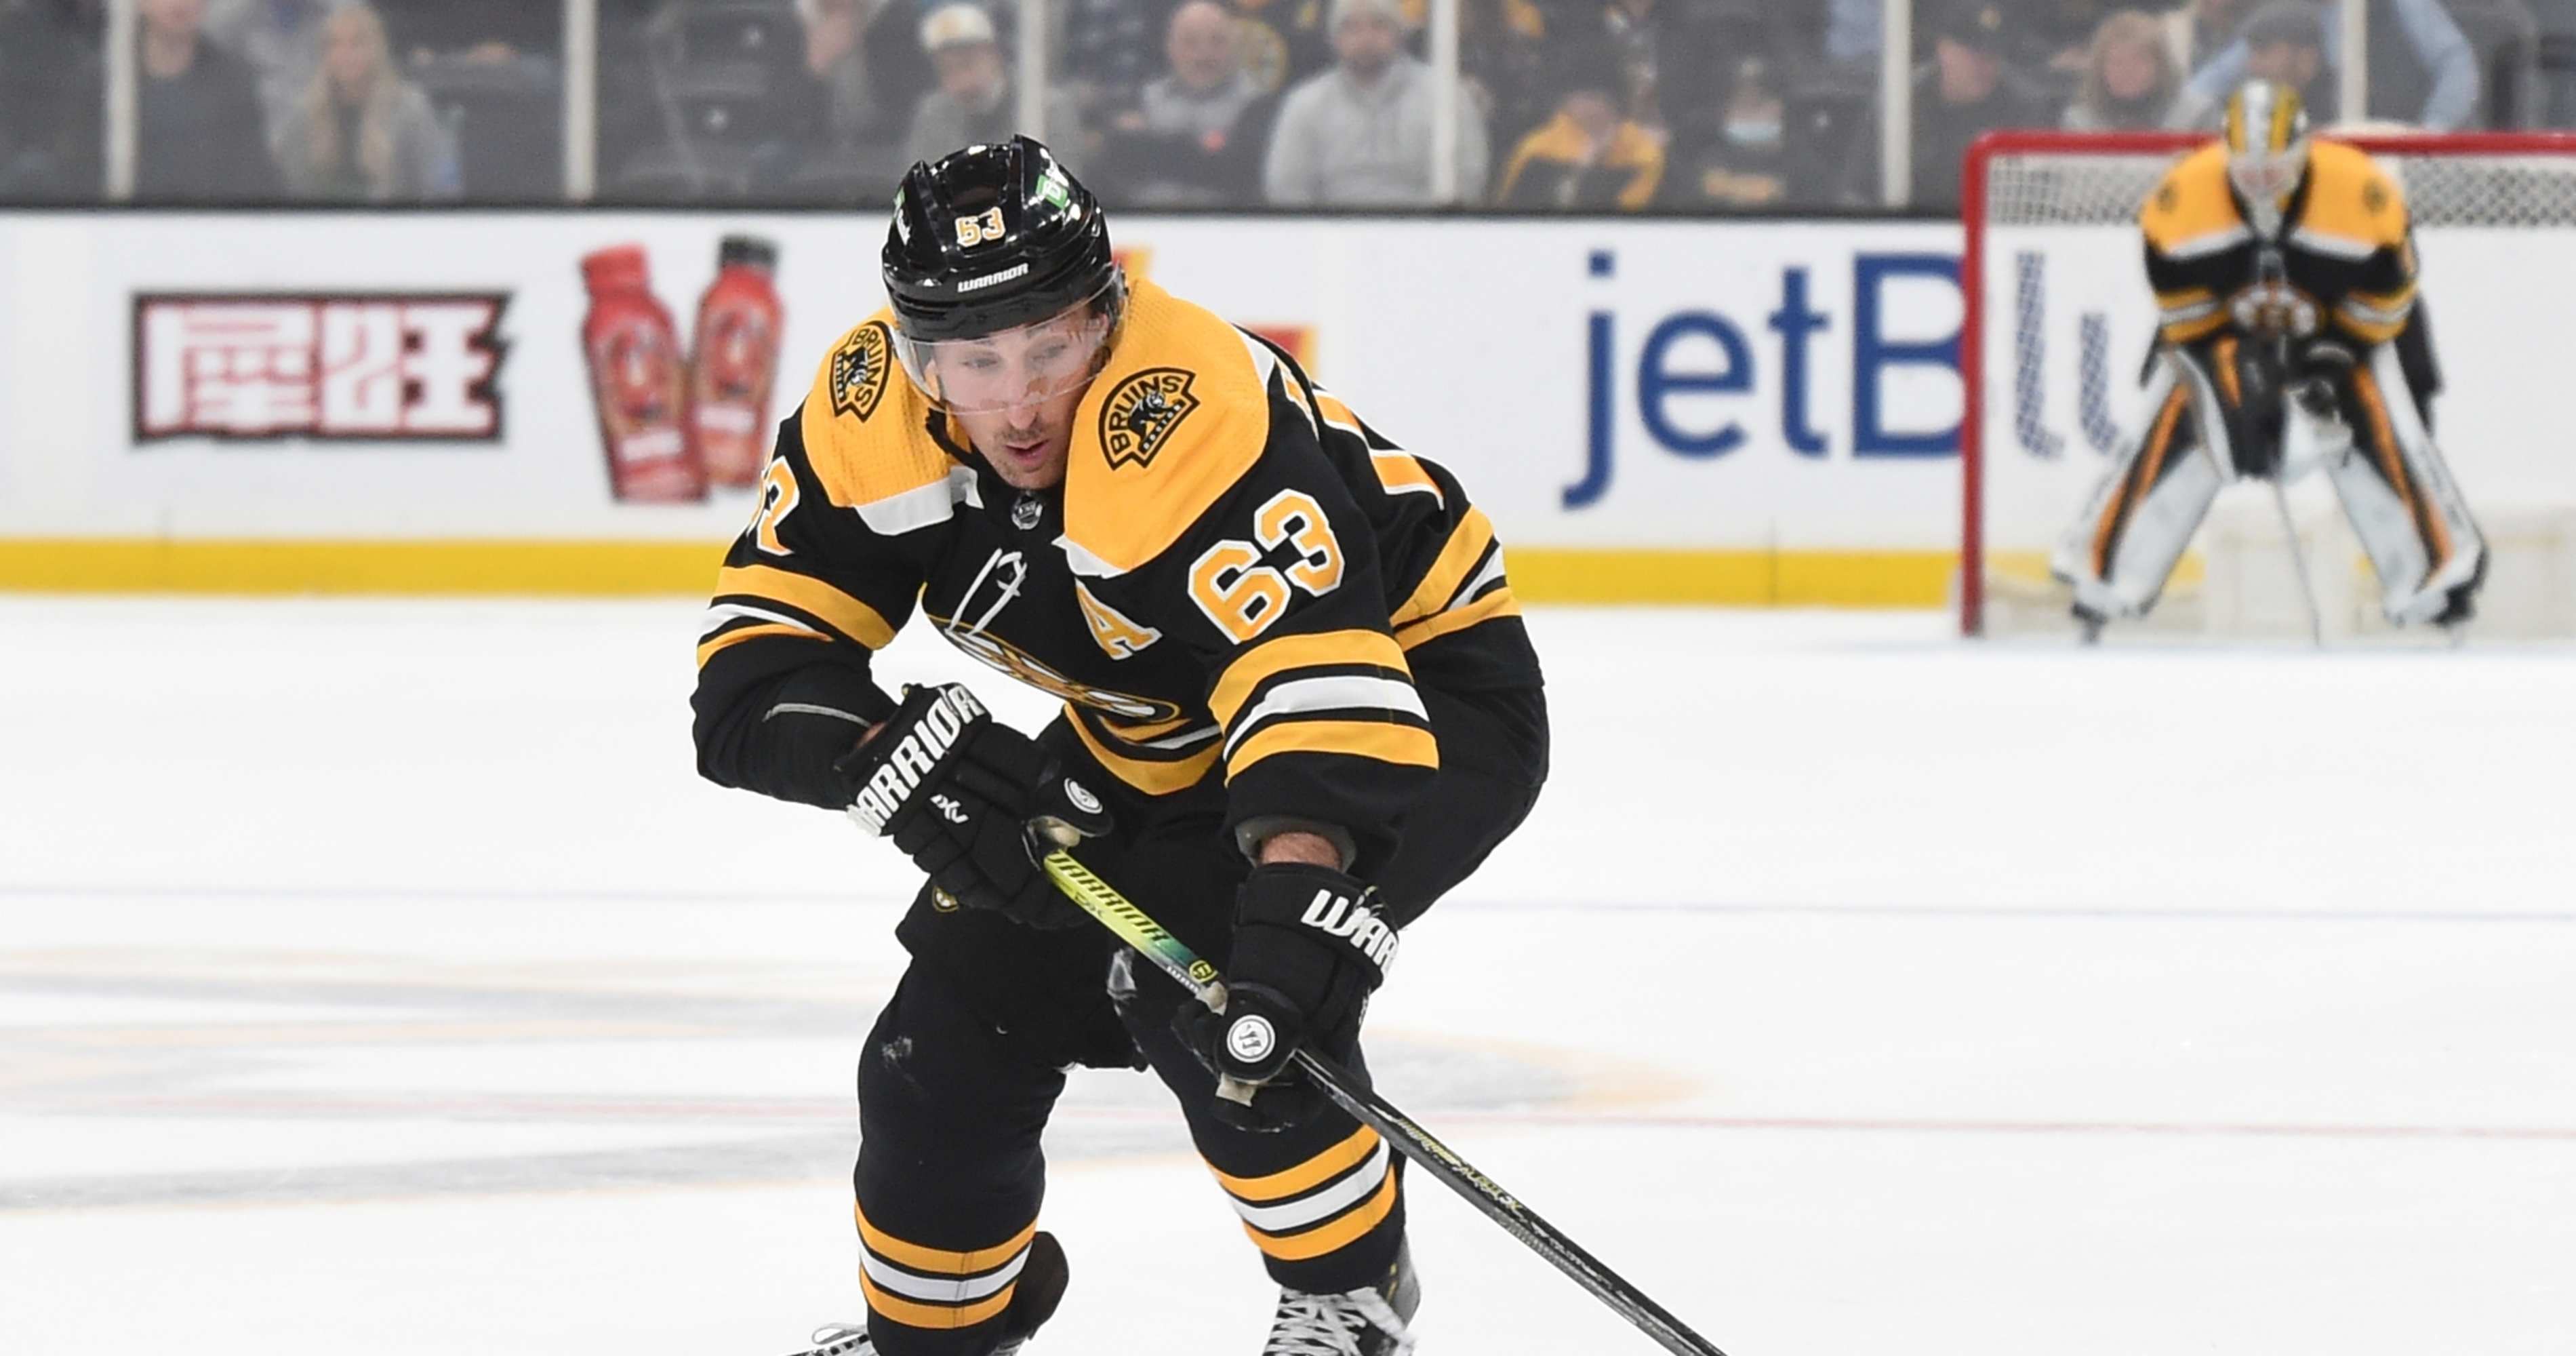 Bruins' Brad Marchand suspended for three games - Pictures - The